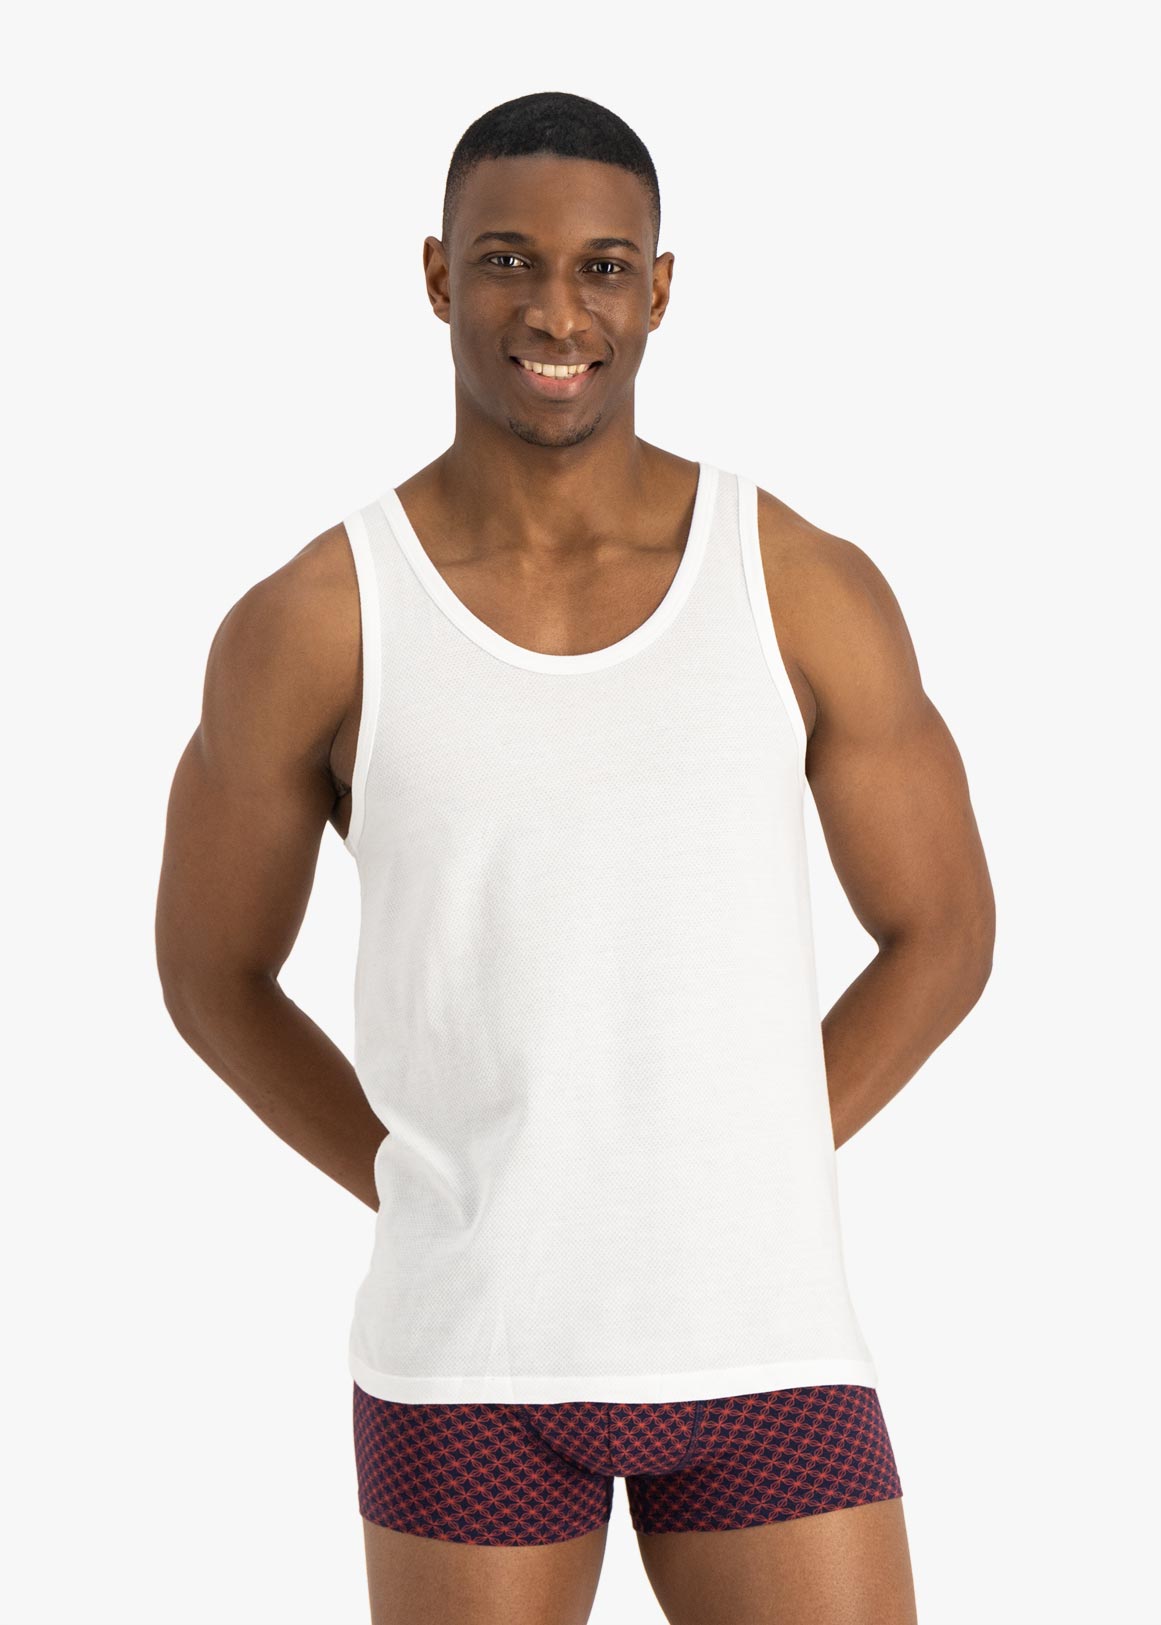 G-Star RAW Cotton Undershirt in Black for Men Mens Clothing Underwear Undershirts and vests 